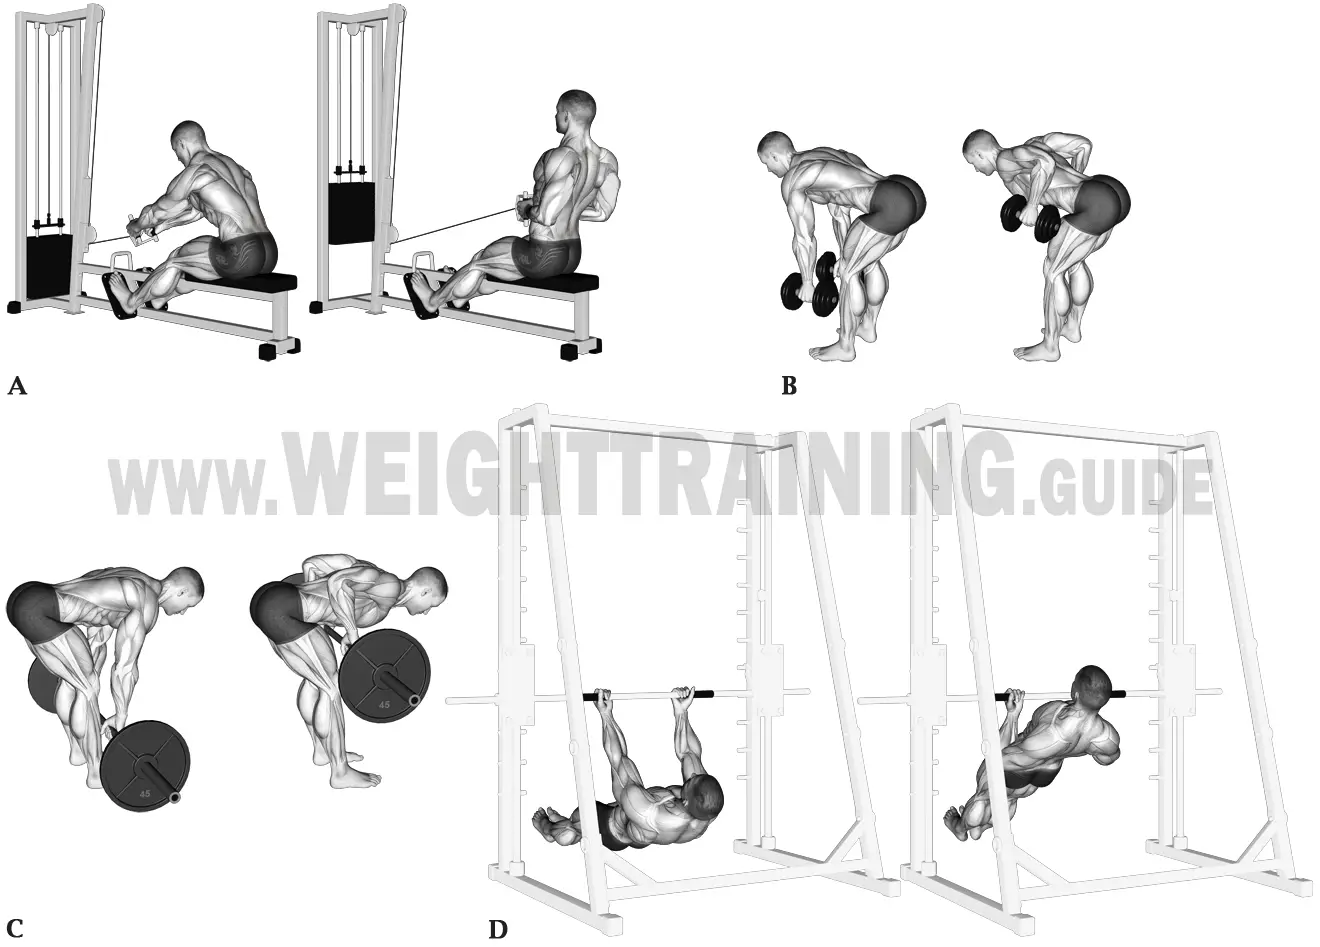 Horizontal pulling exercises, upper arms close to torso